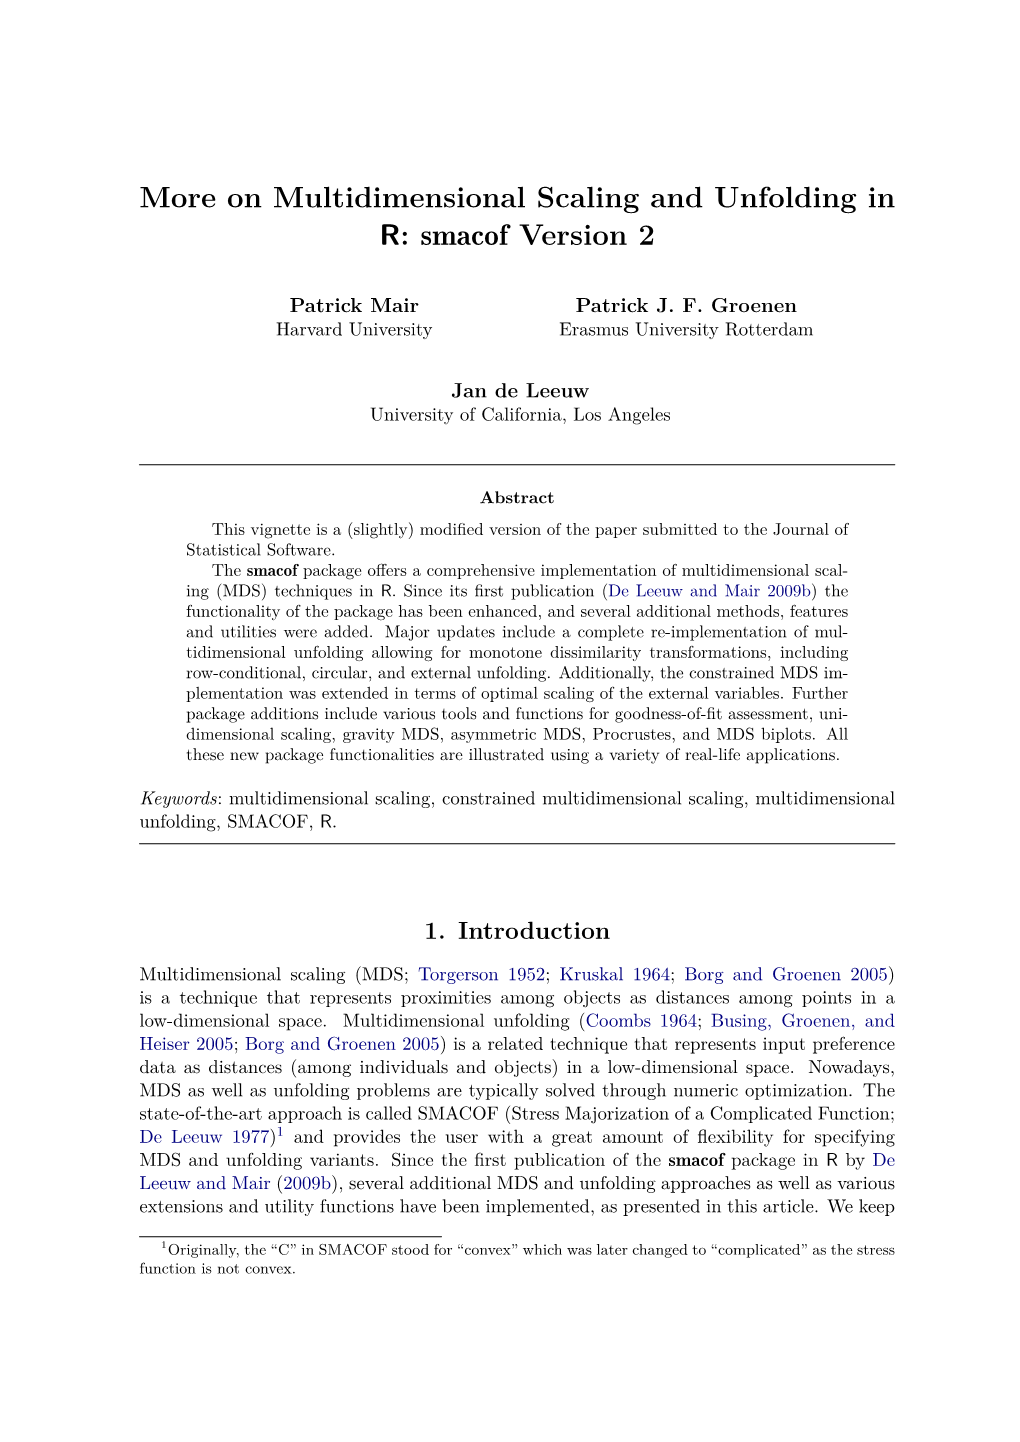 On Multidimensional Scaling and Unfolding in R: Smacof Version 2